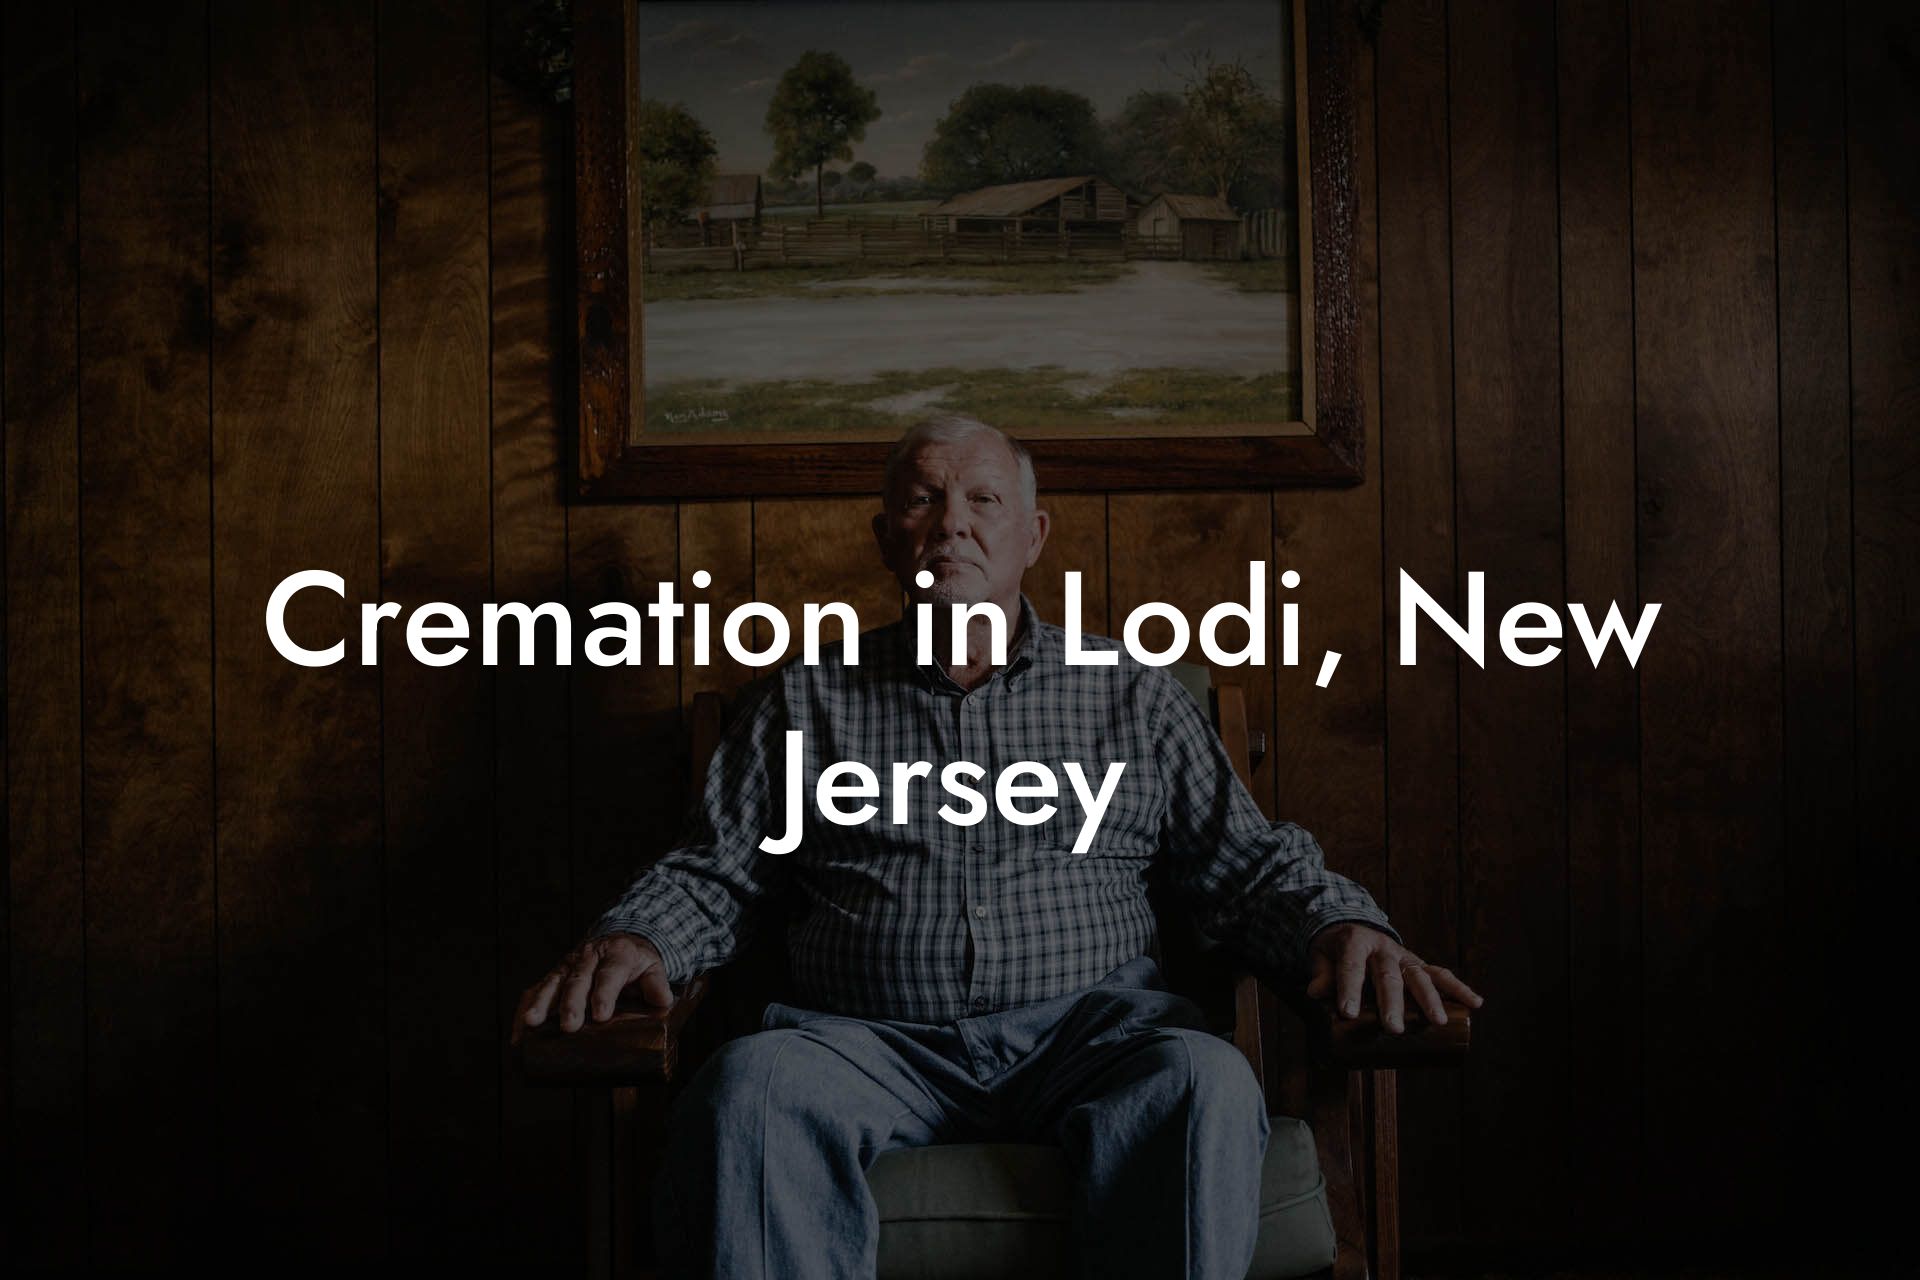 Cremation in Lodi, New Jersey